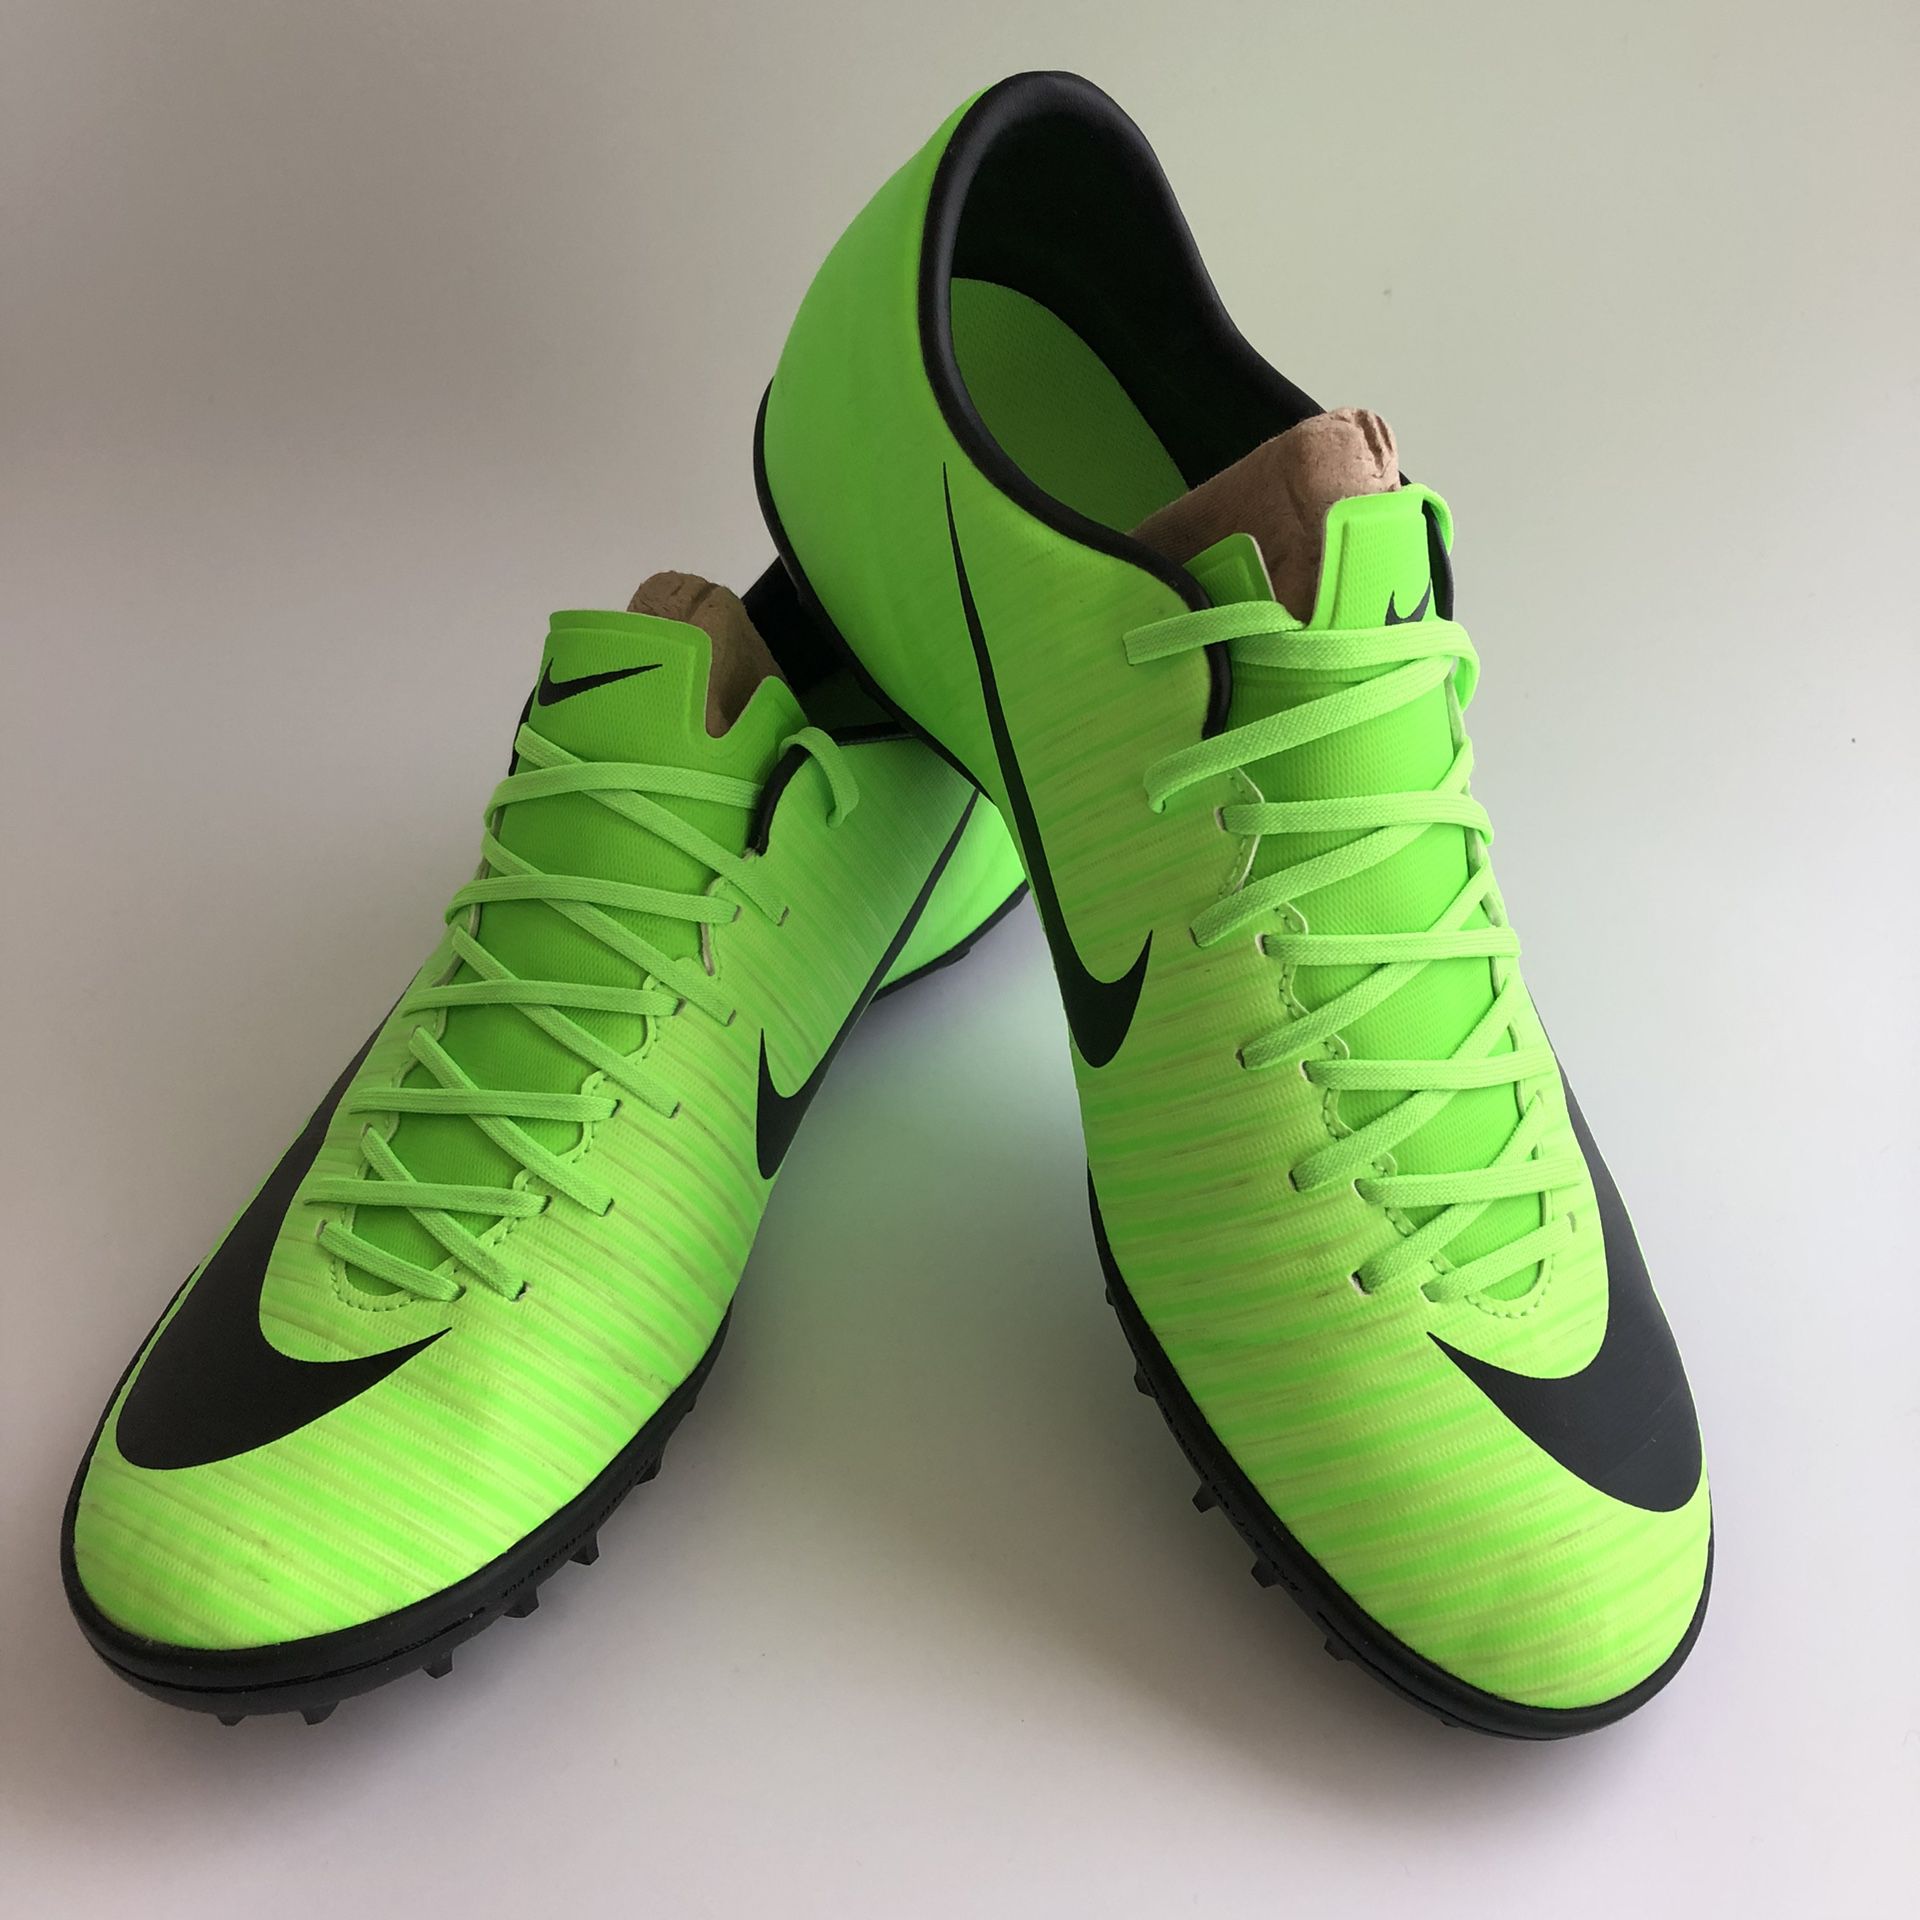 Nike Mercurial X Soccer Shoes Ghost Green - Black(Indoor or Artificial Grass) Size:9.5